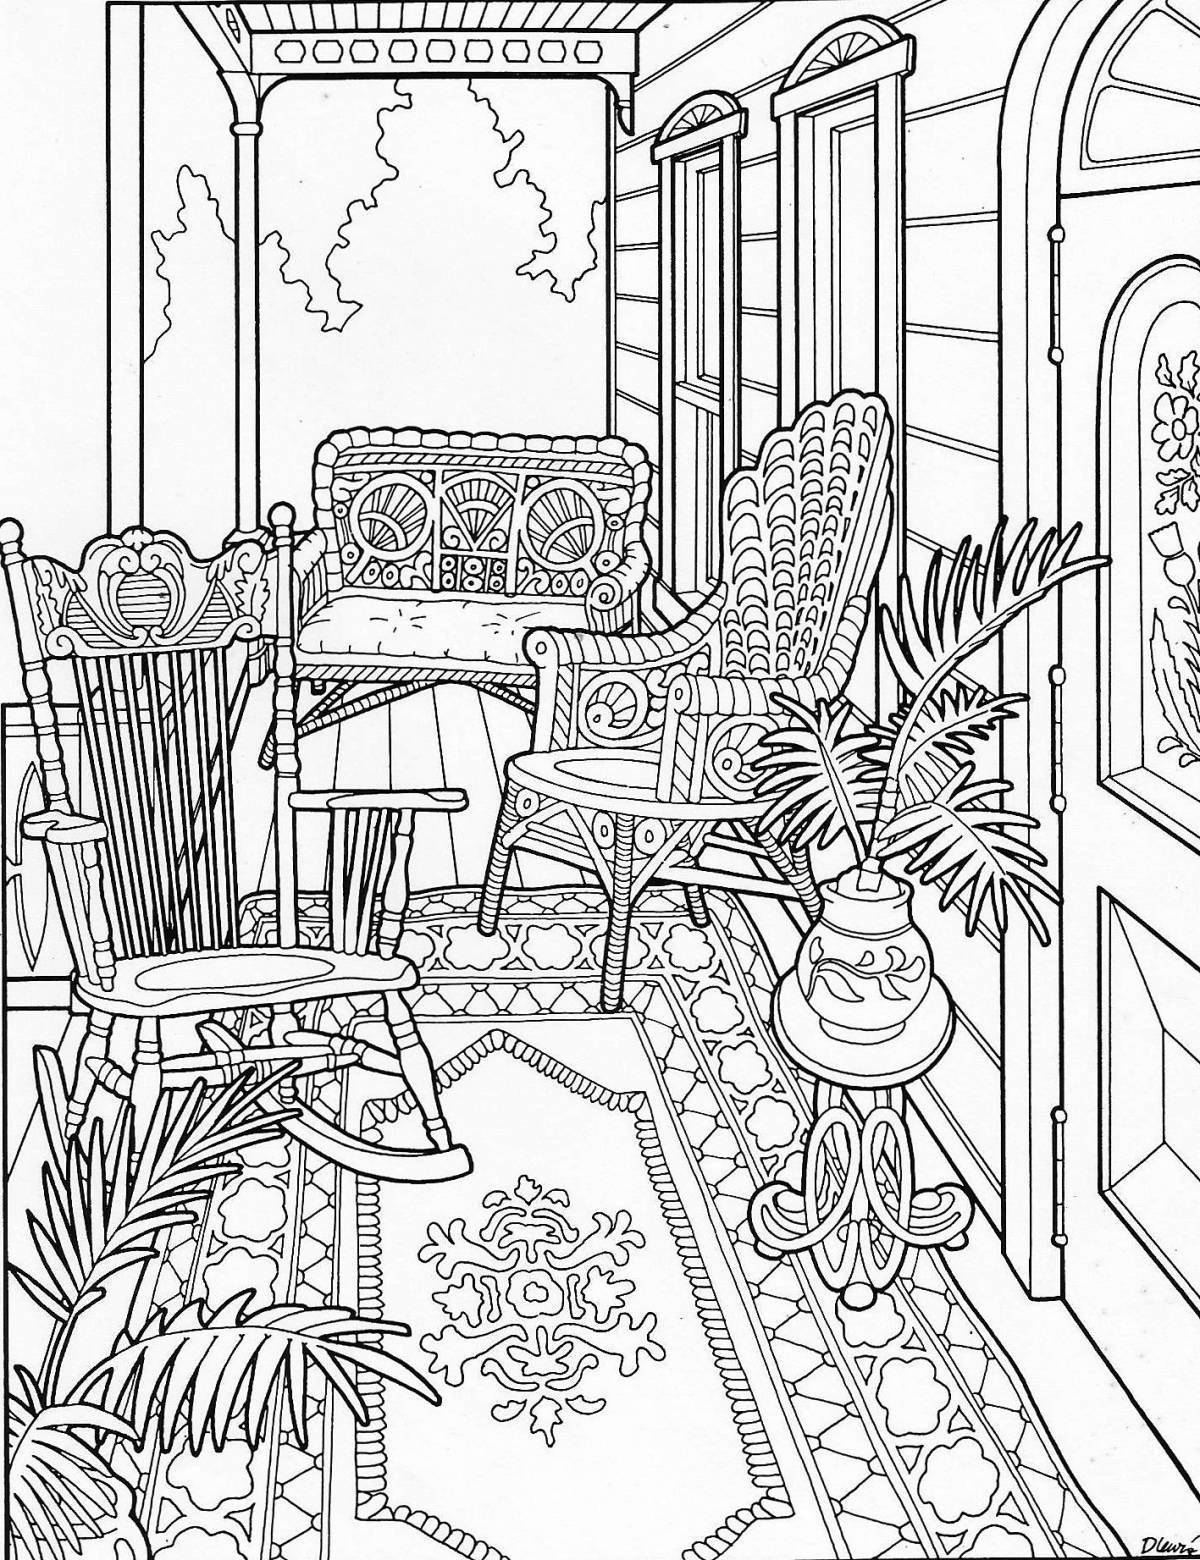 Fun room coloring pages